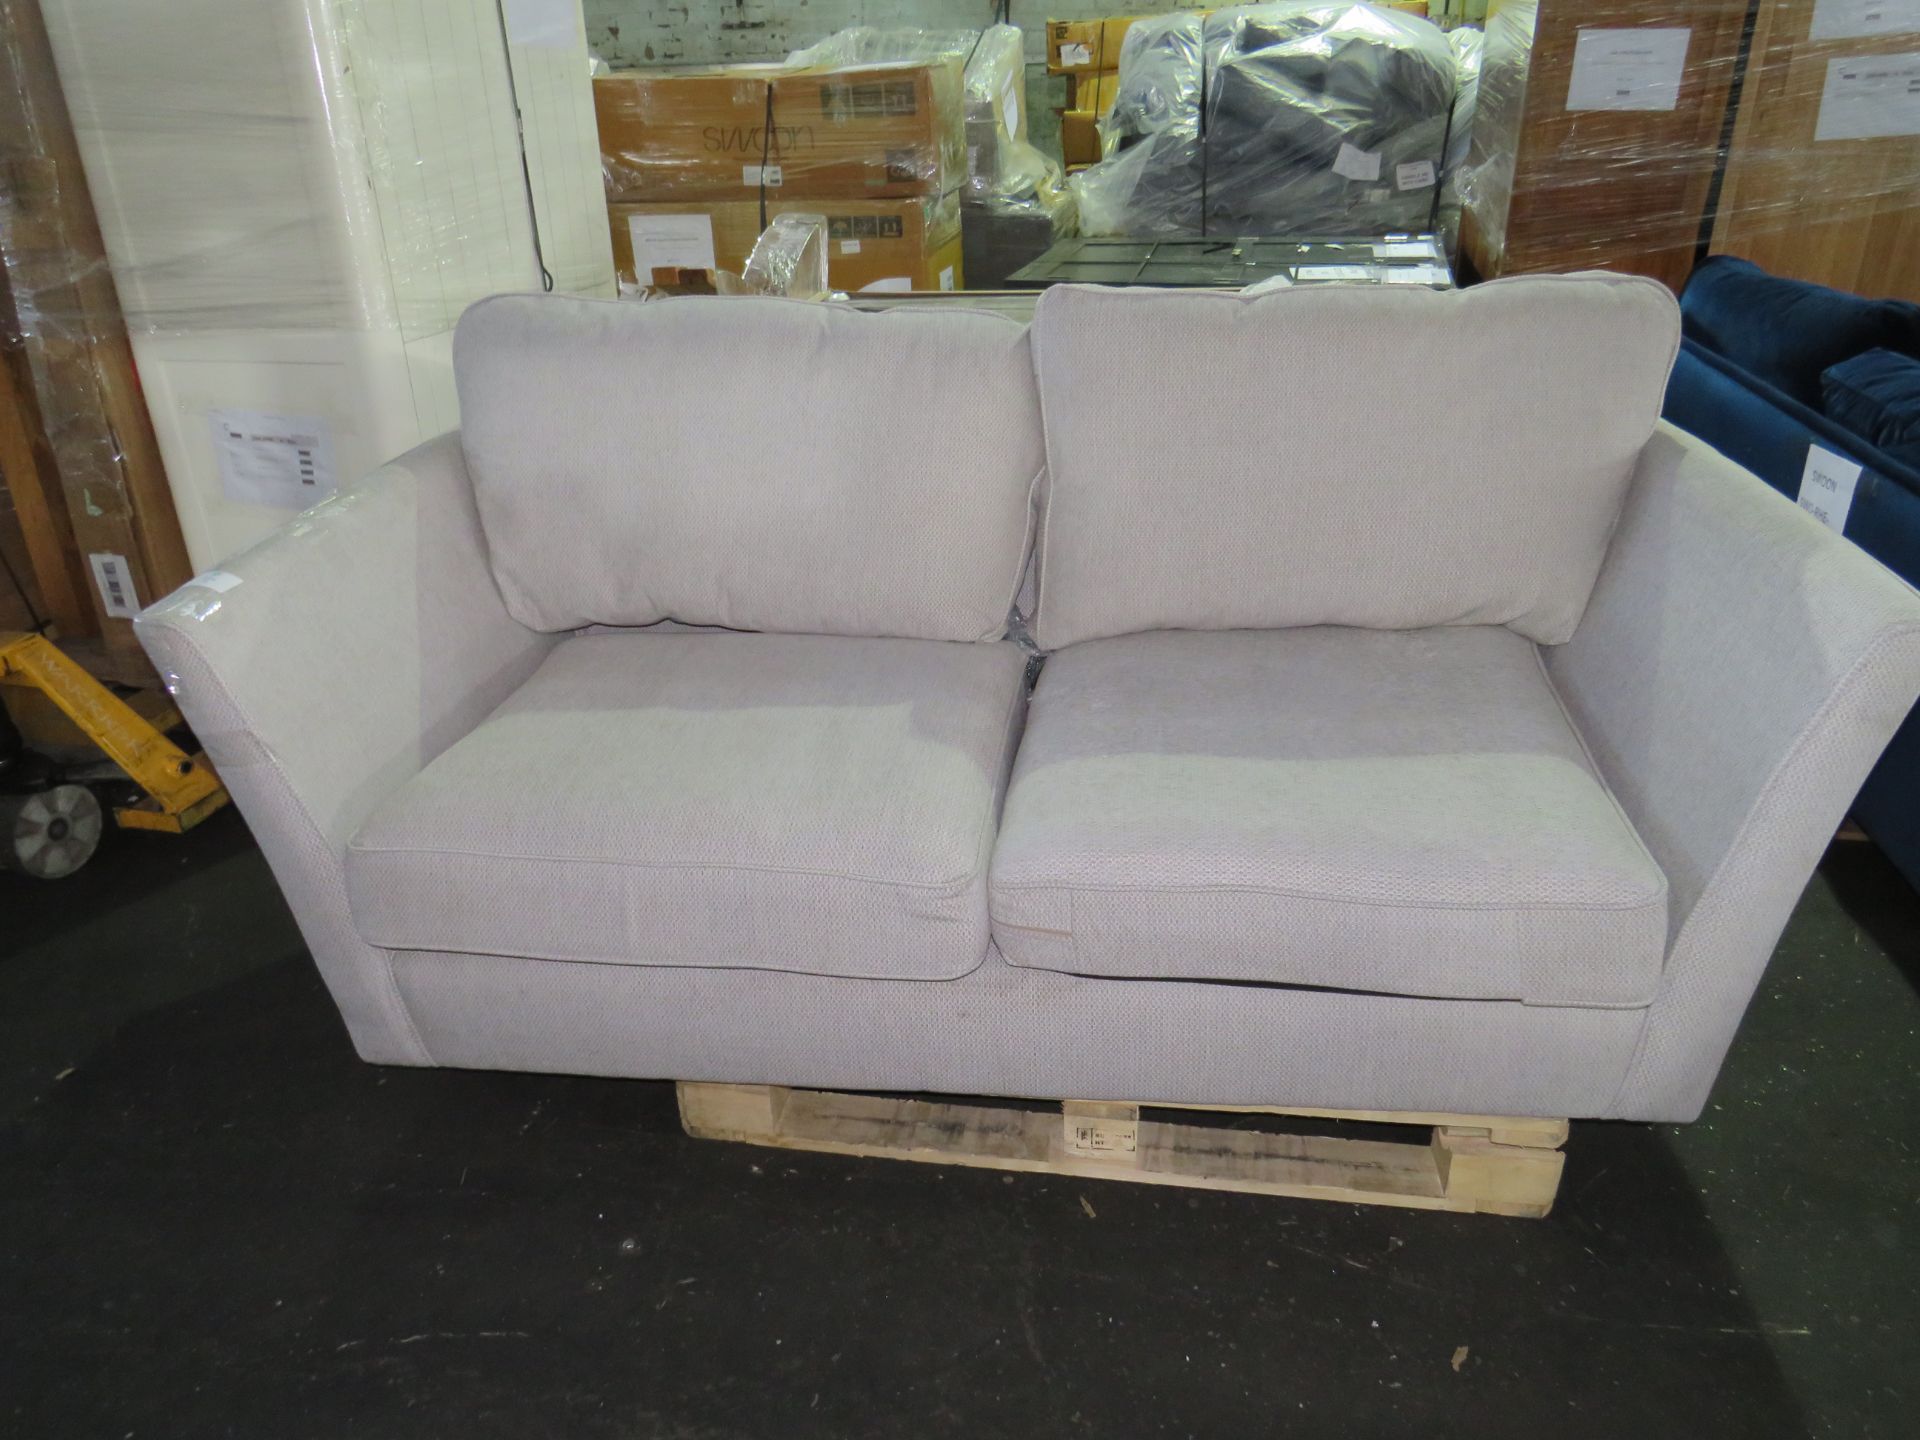 Oak Furnitureland Gainsborough 3 Seater Sofa in Minerva Silver with Slate Scatters RRP ?1149.99 - Image 2 of 3